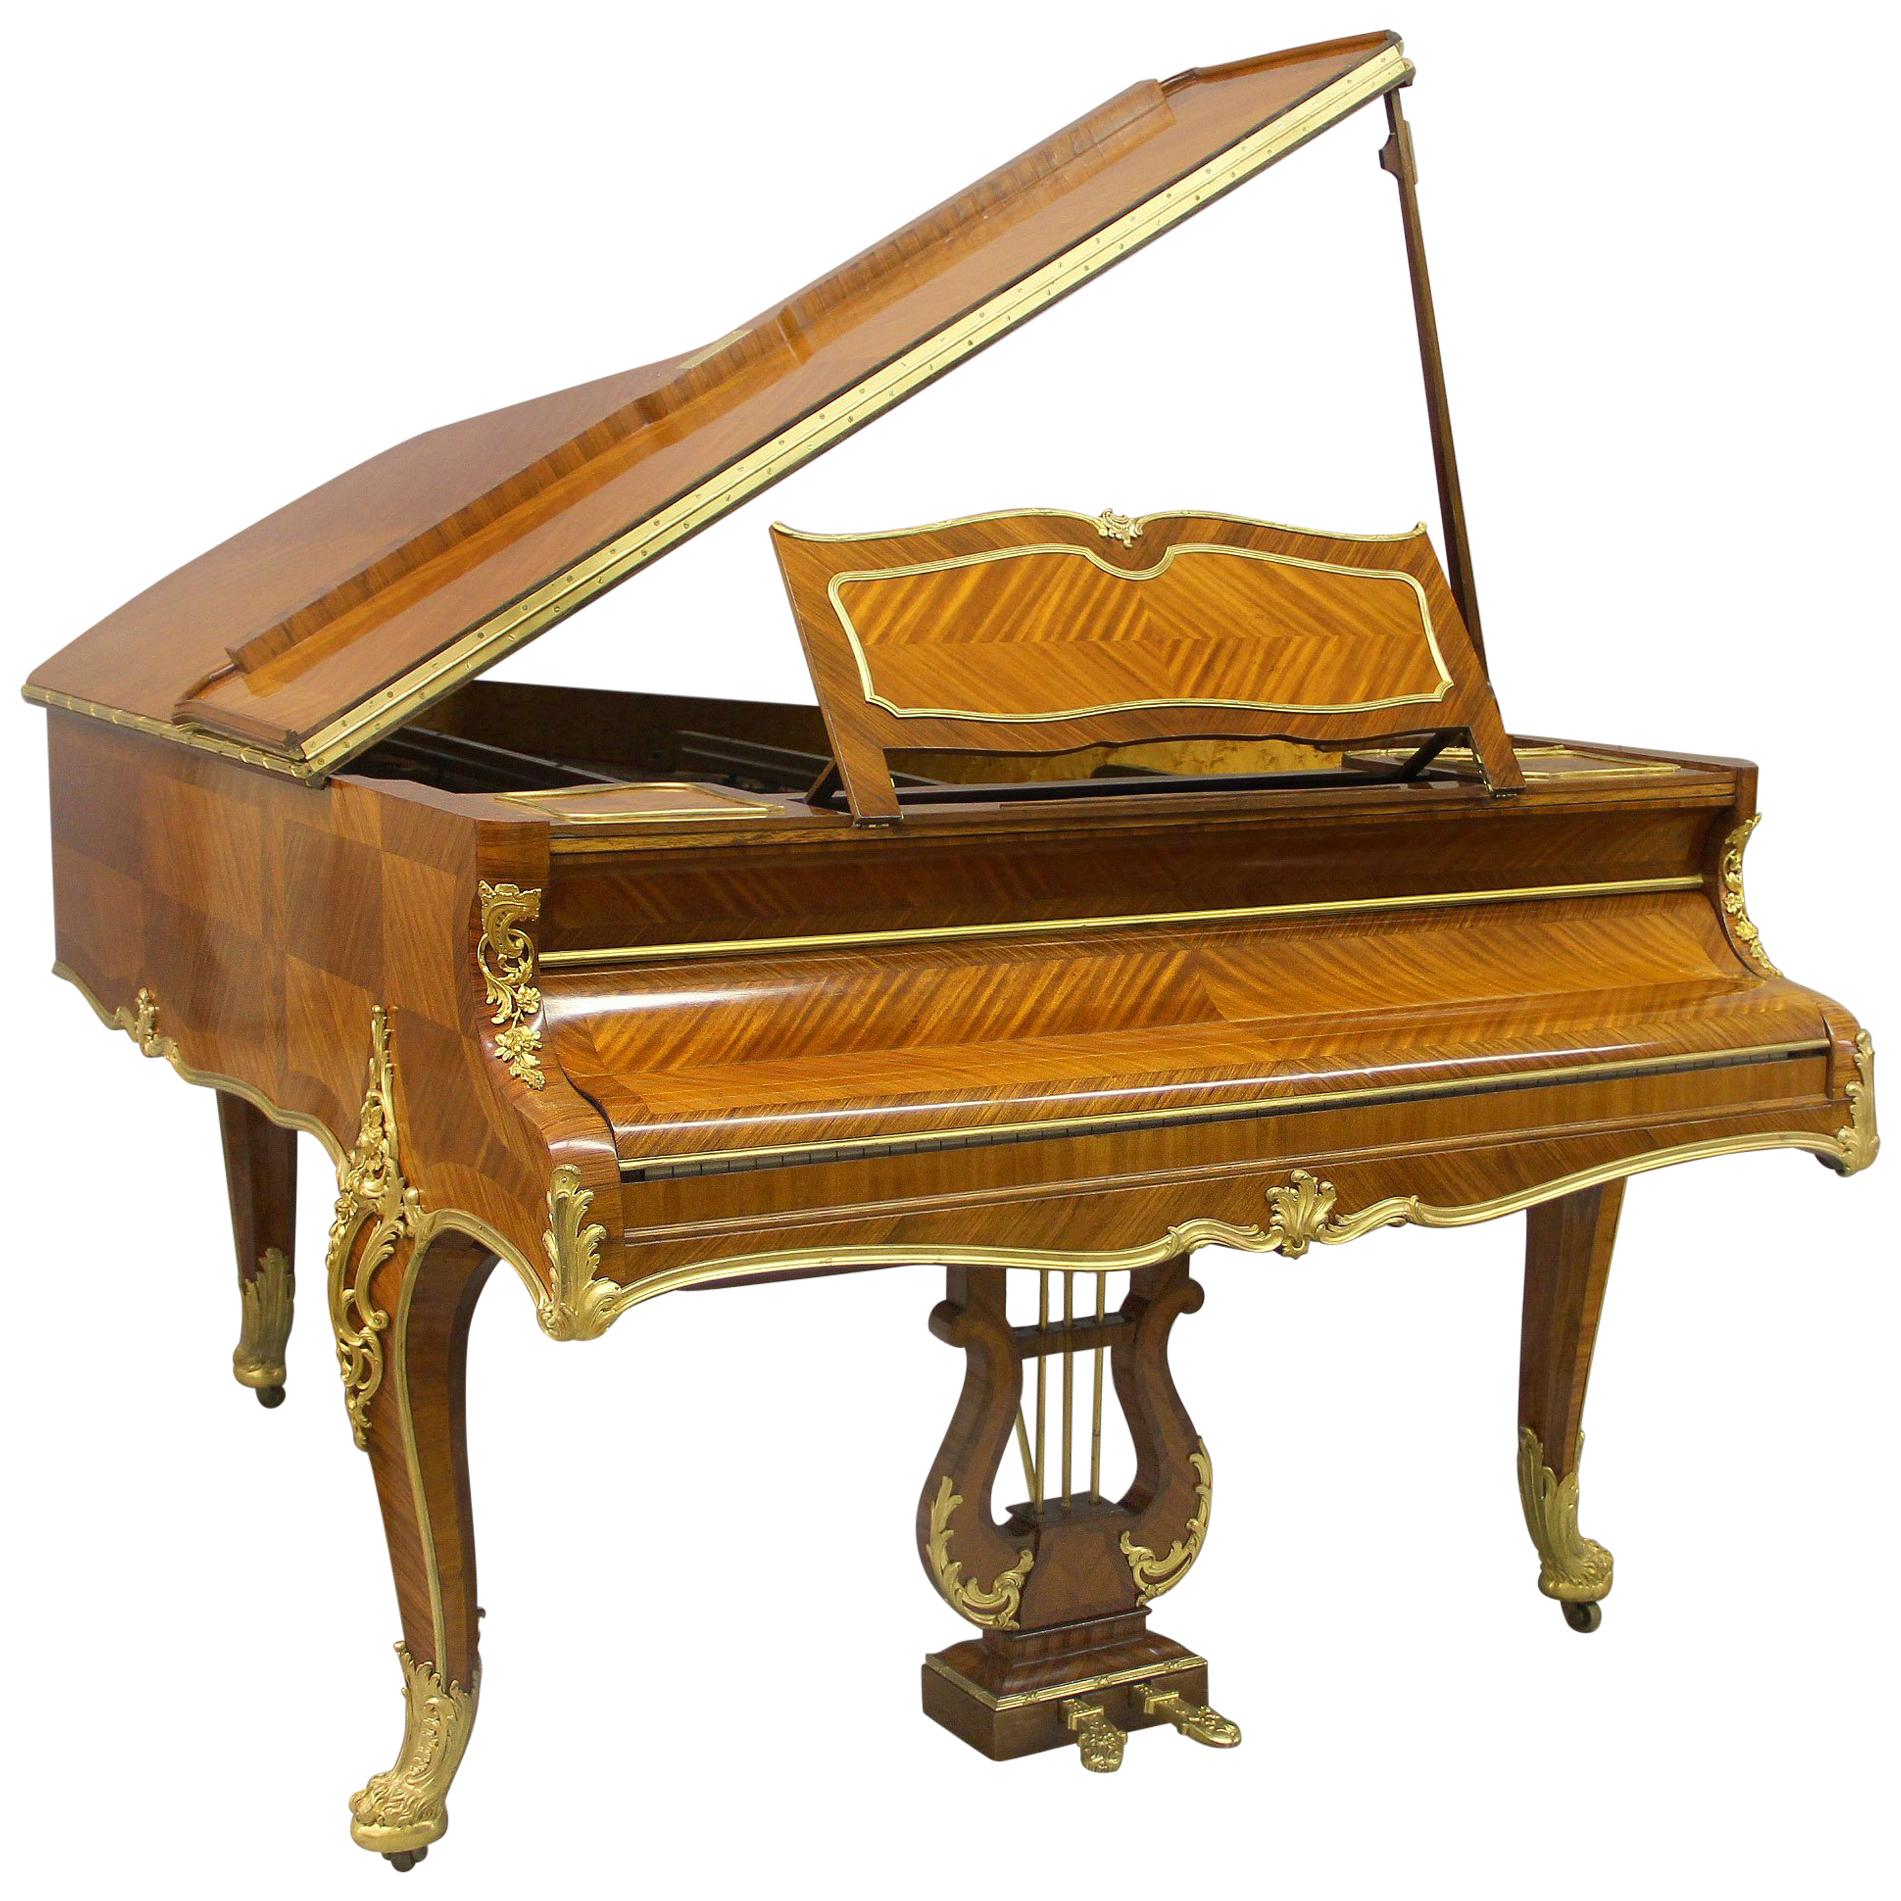 Fine Early 20th Century Gilt Bronze Mounted Grand Erard Piano by François Linke